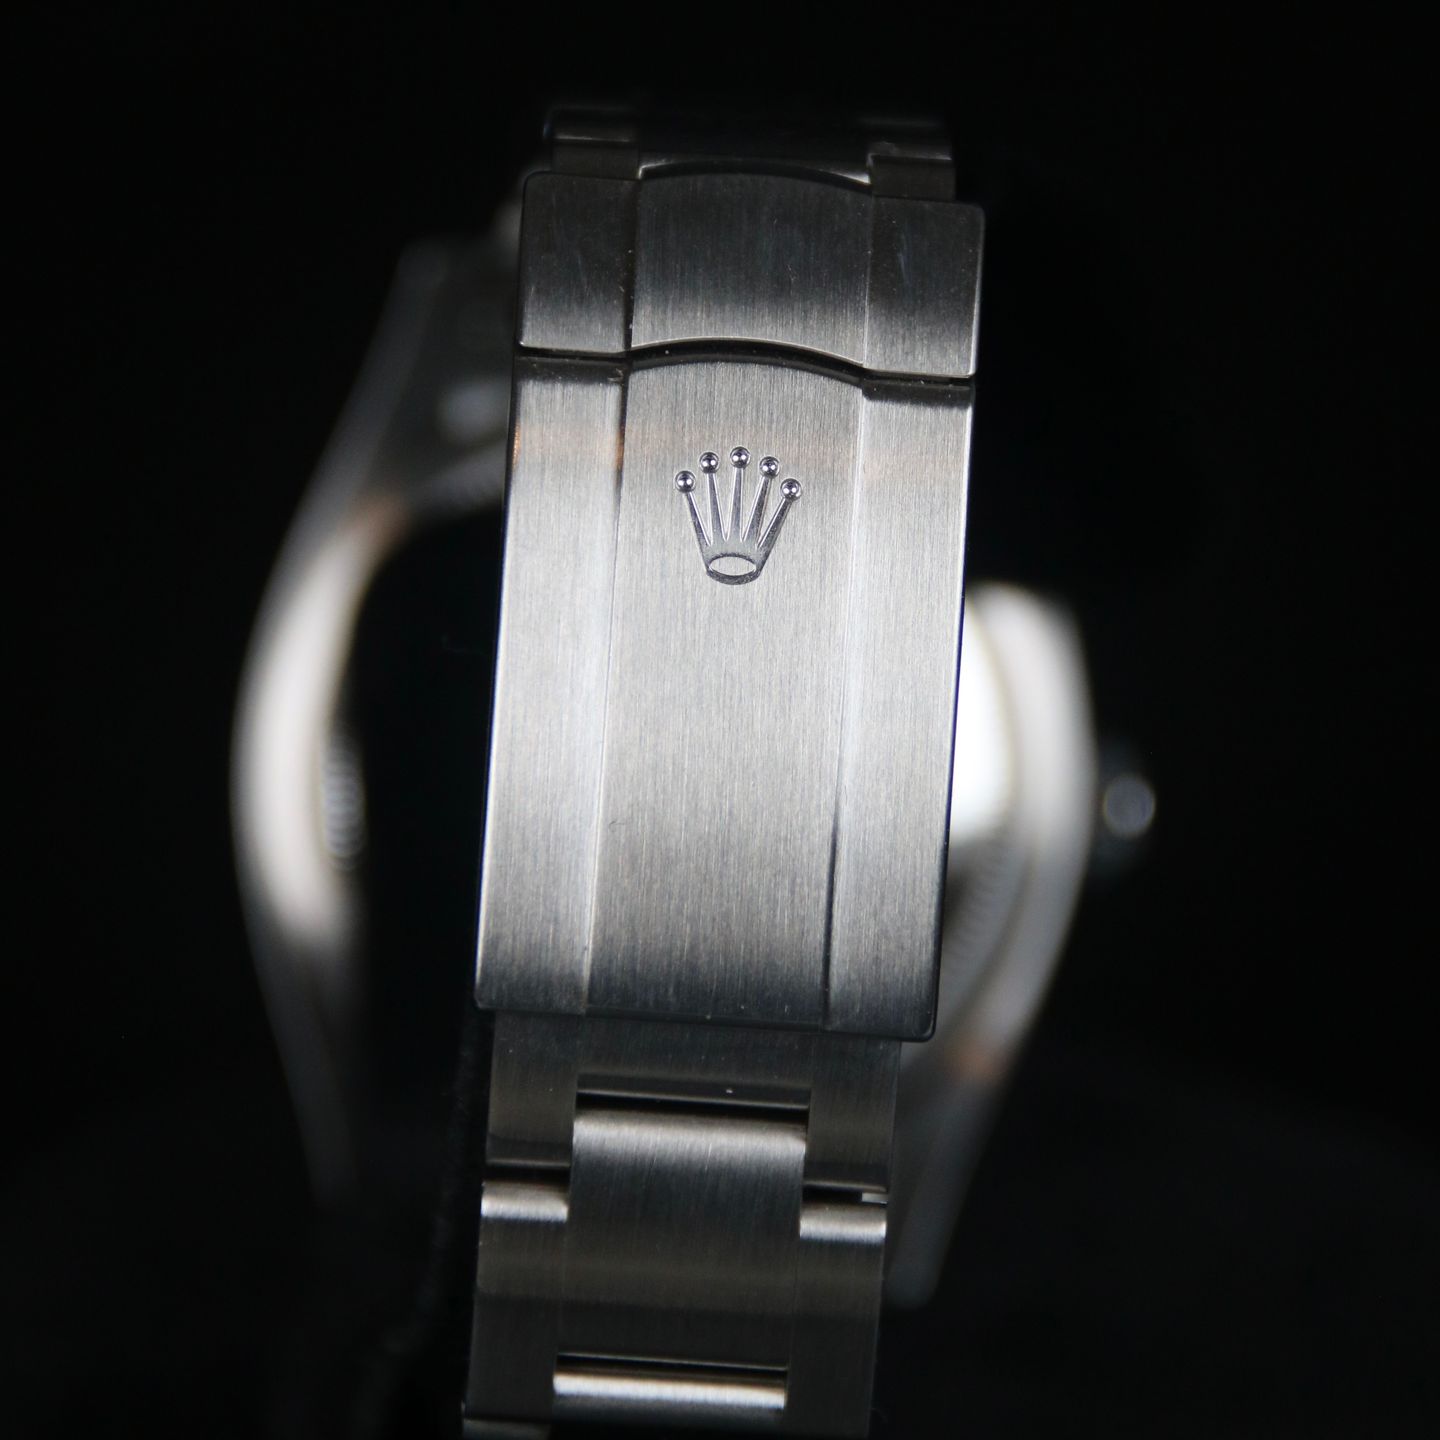 Rolex Oyster Perpetual 36 126000 - (4/8)